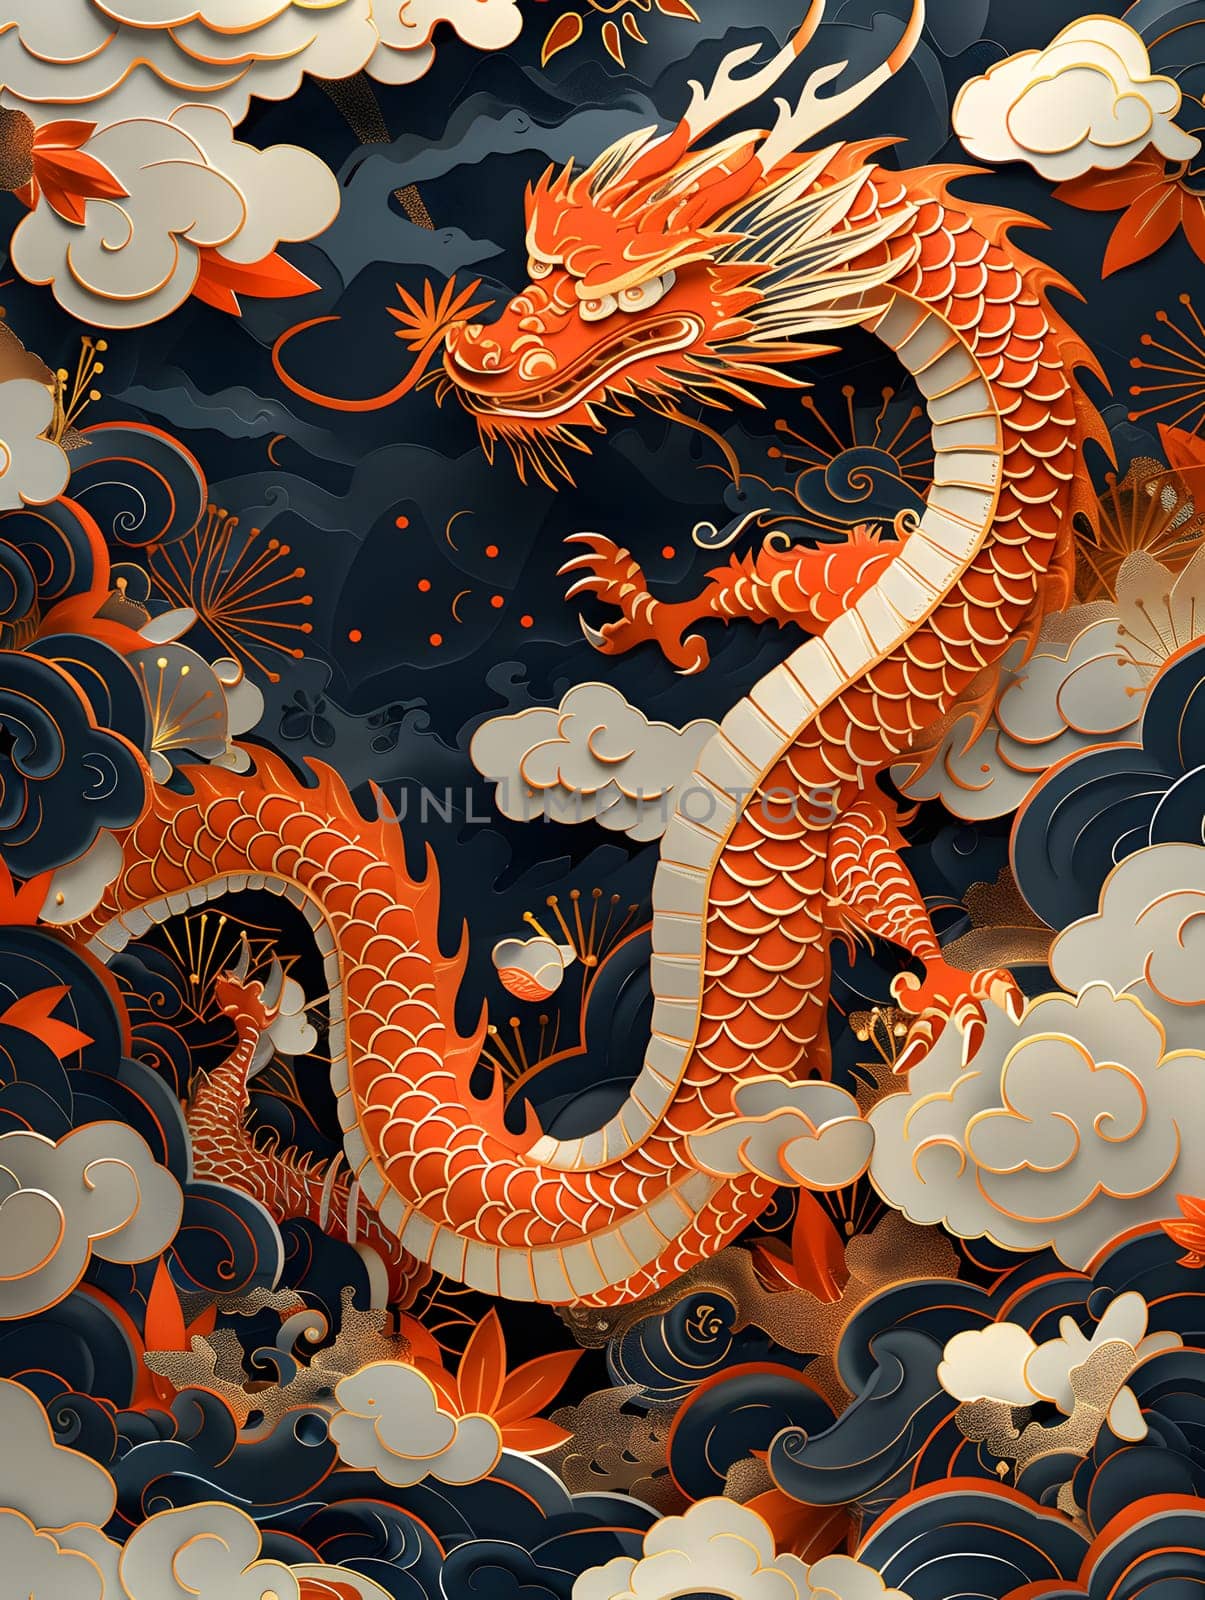 A red dragon, a fictional character, is depicted in a painting surrounded by clouds on a dark background, creating a captivating illustration in the visual arts genre